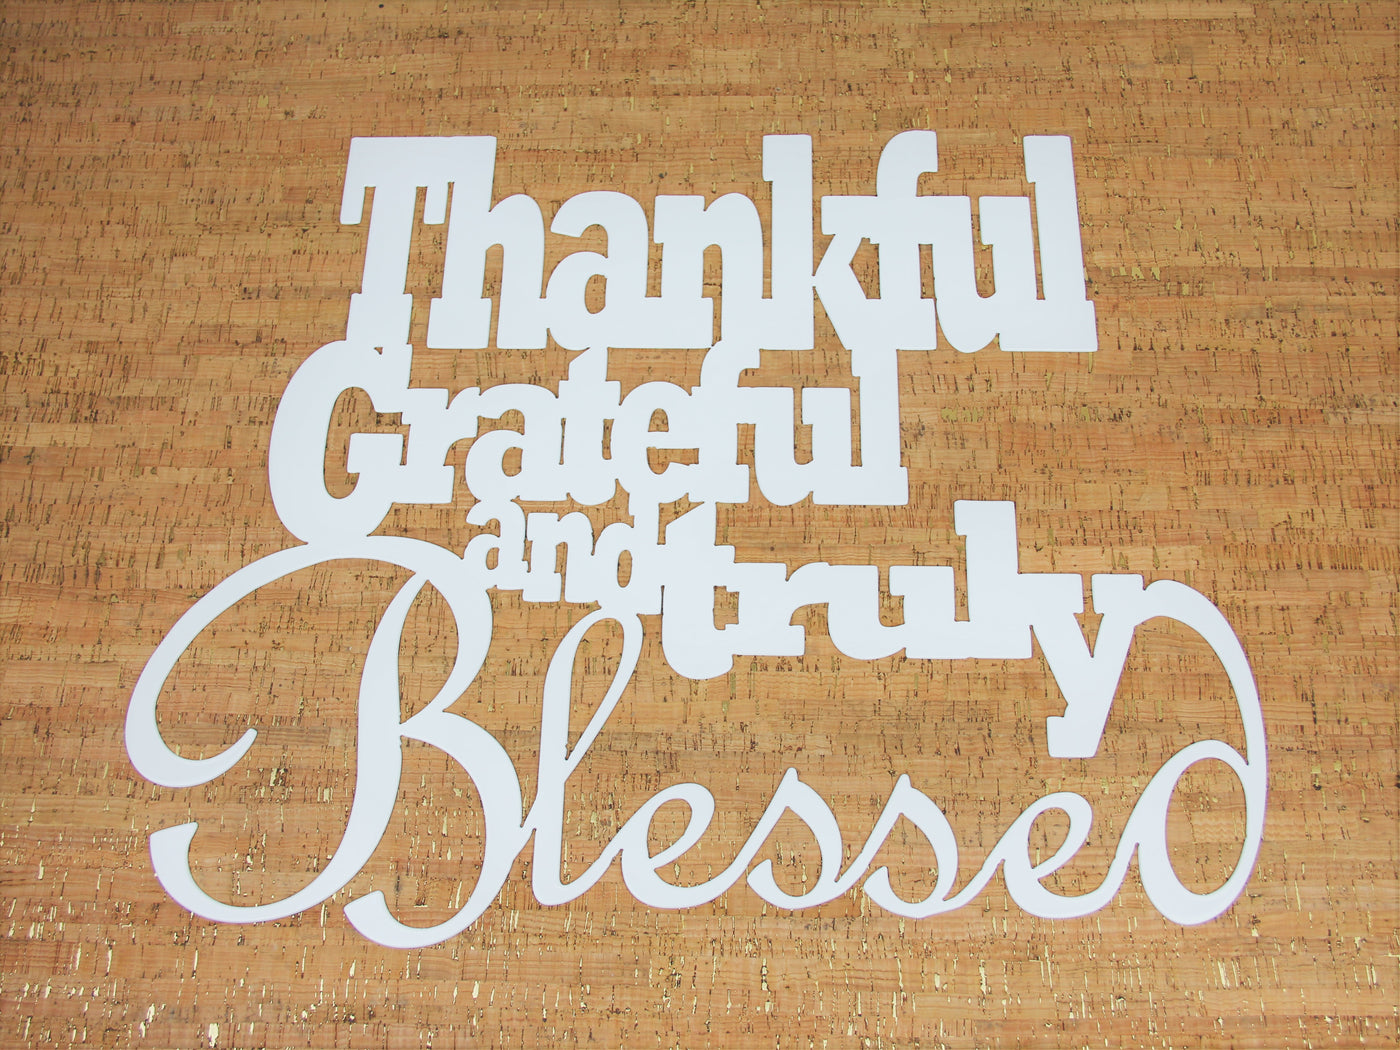 Thankful Grateful and Truly Blessed Metal Word Sign - Madison Iron and Wood - Wall Art - metal outdoor decor - Steel deocrations - american made products - veteran owned business products - fencing decorations - fencing supplies - custom wall decorations - personalized wall signs - steel - decorative post caps - steel post caps - metal post caps - brackets - structural brackets - home improvement - easter - easter decorations - easter gift - easter yard decor